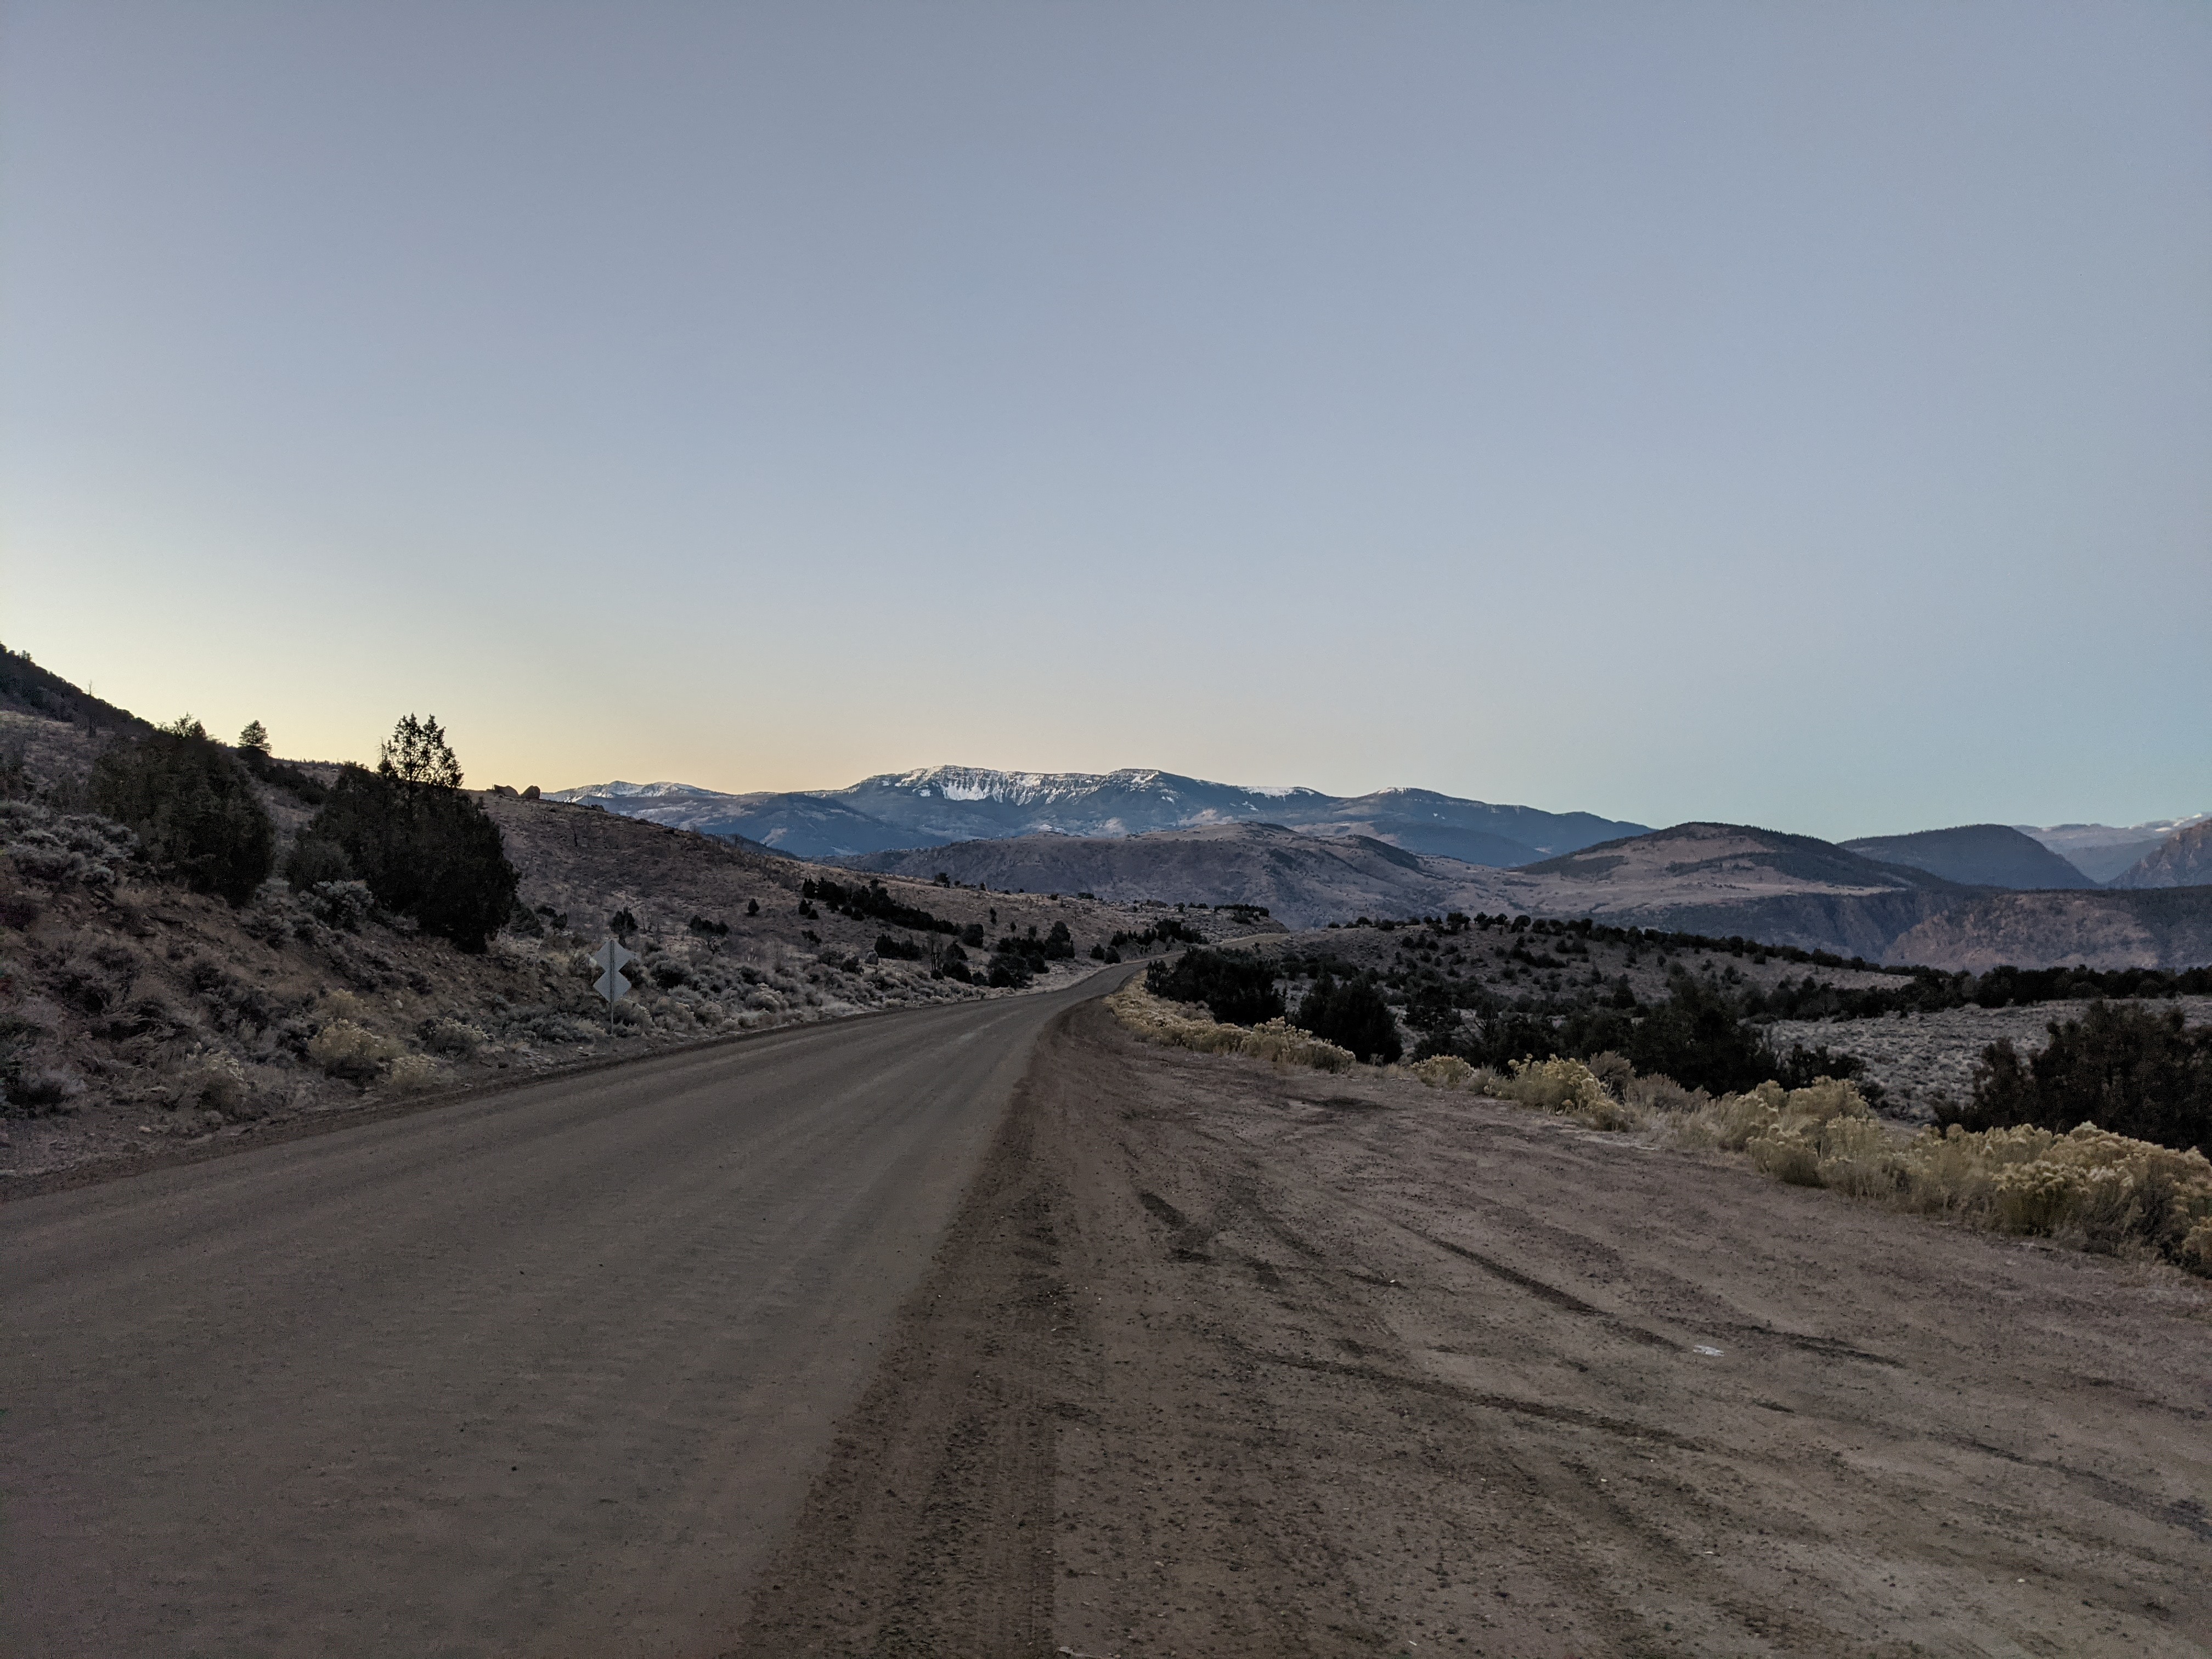 The drive in to my spot for my Colorado OTC elk hunt. Driving in to a mountain sun rise.